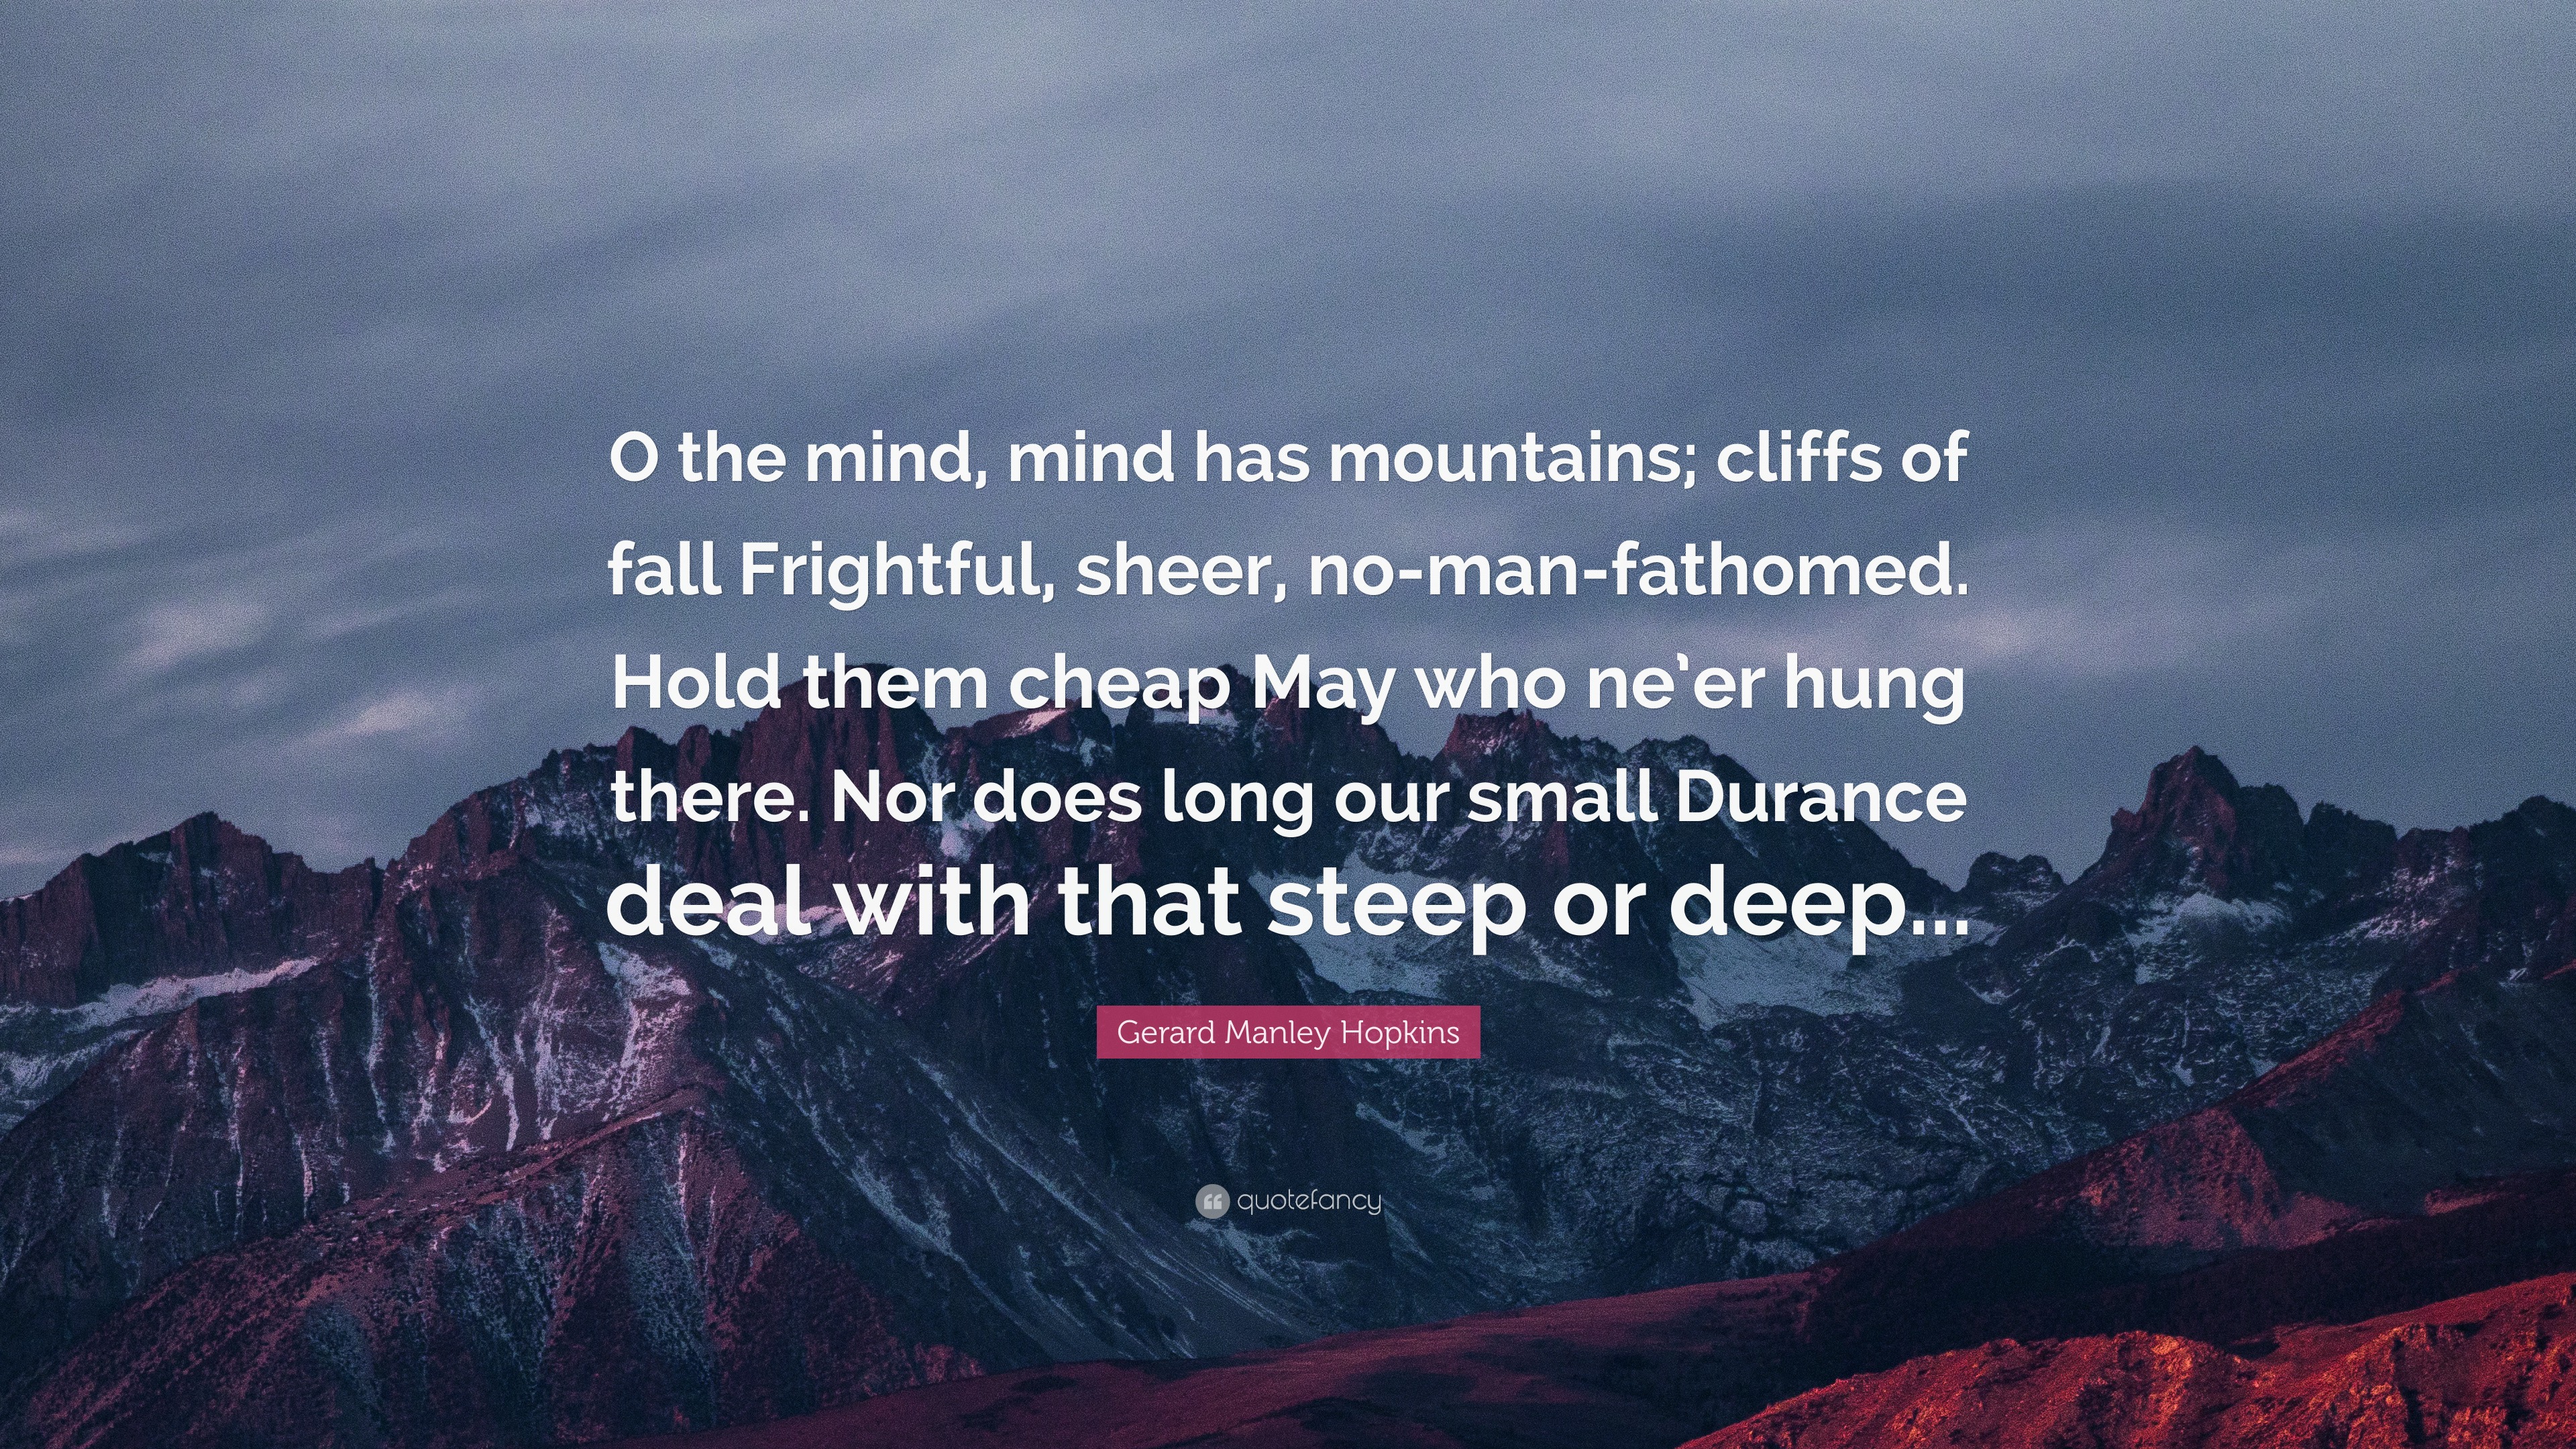 Gerard Manley Hopkins Quote: “O the mind, mind has mountains; cliffs of ...